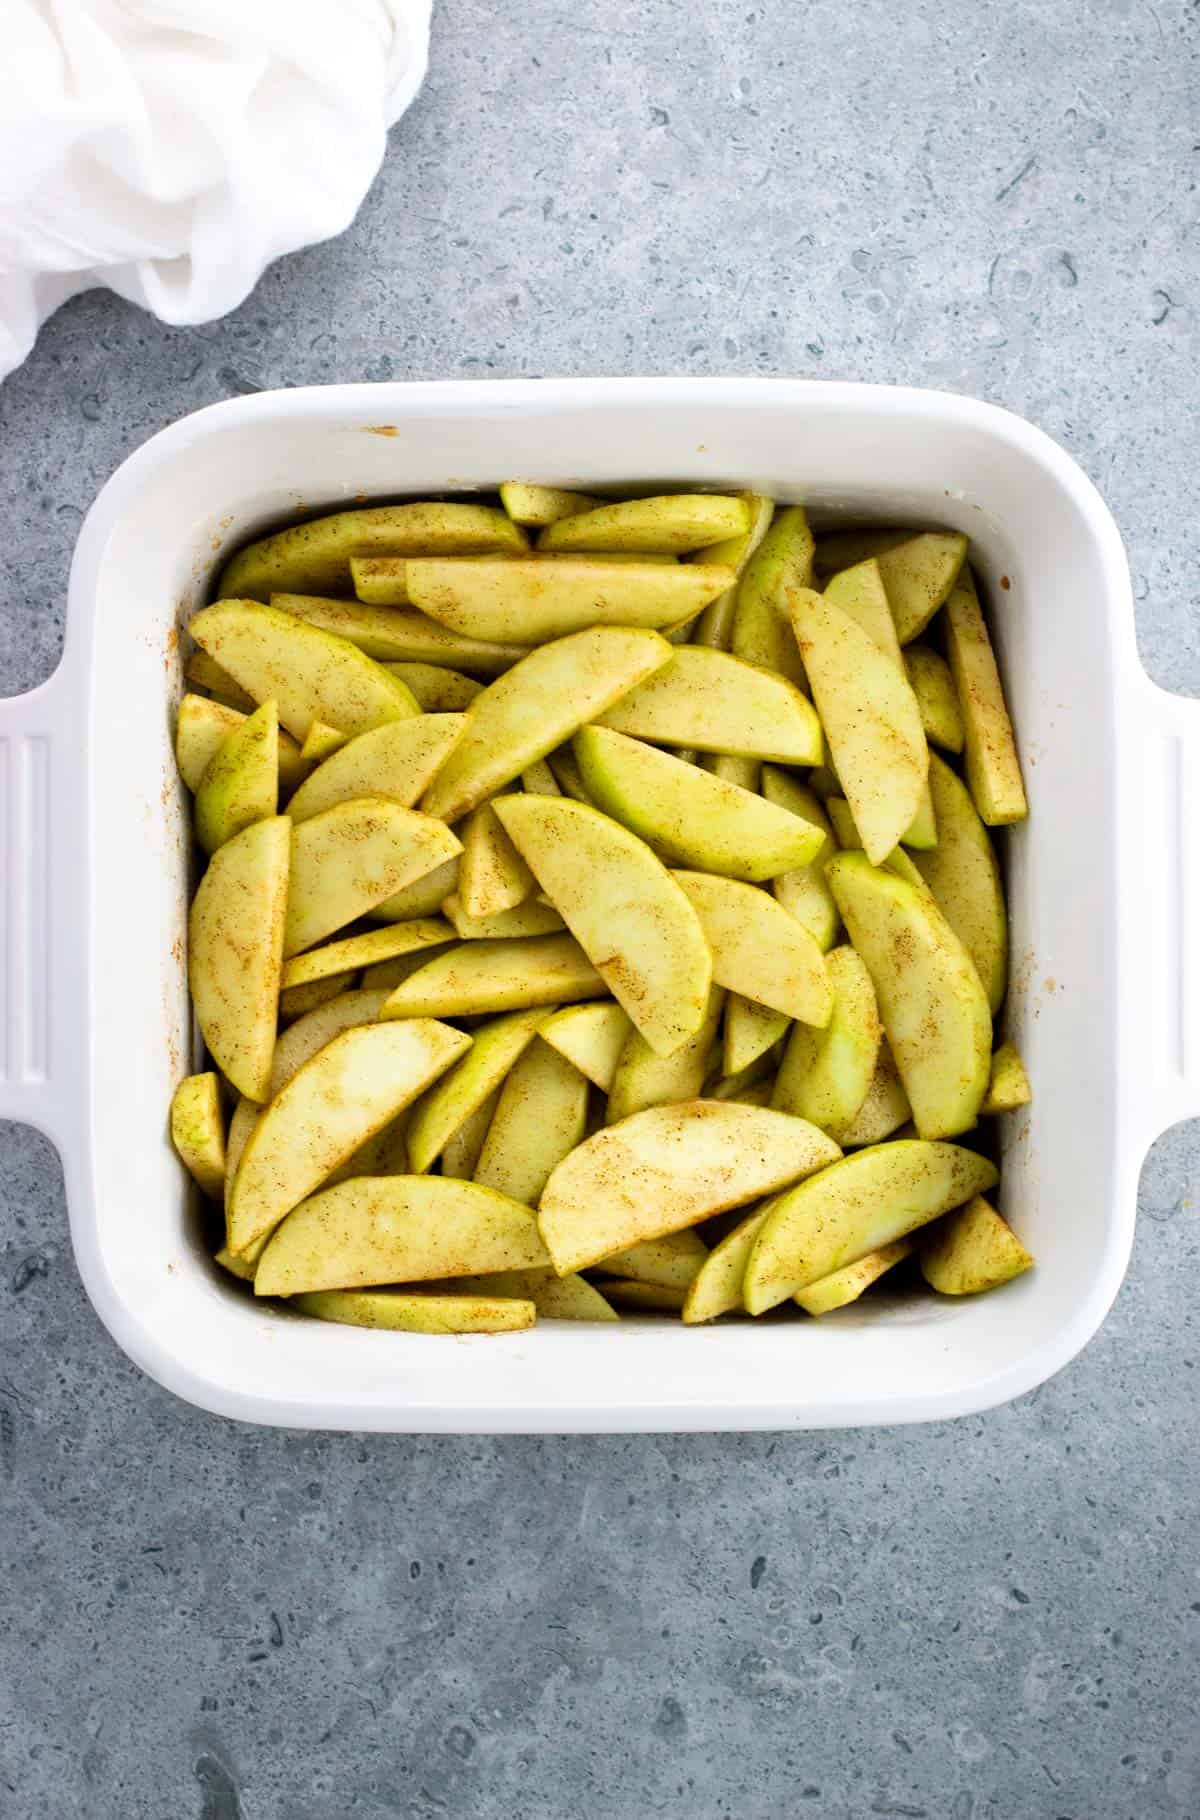 Apple slices in a square baking dish.